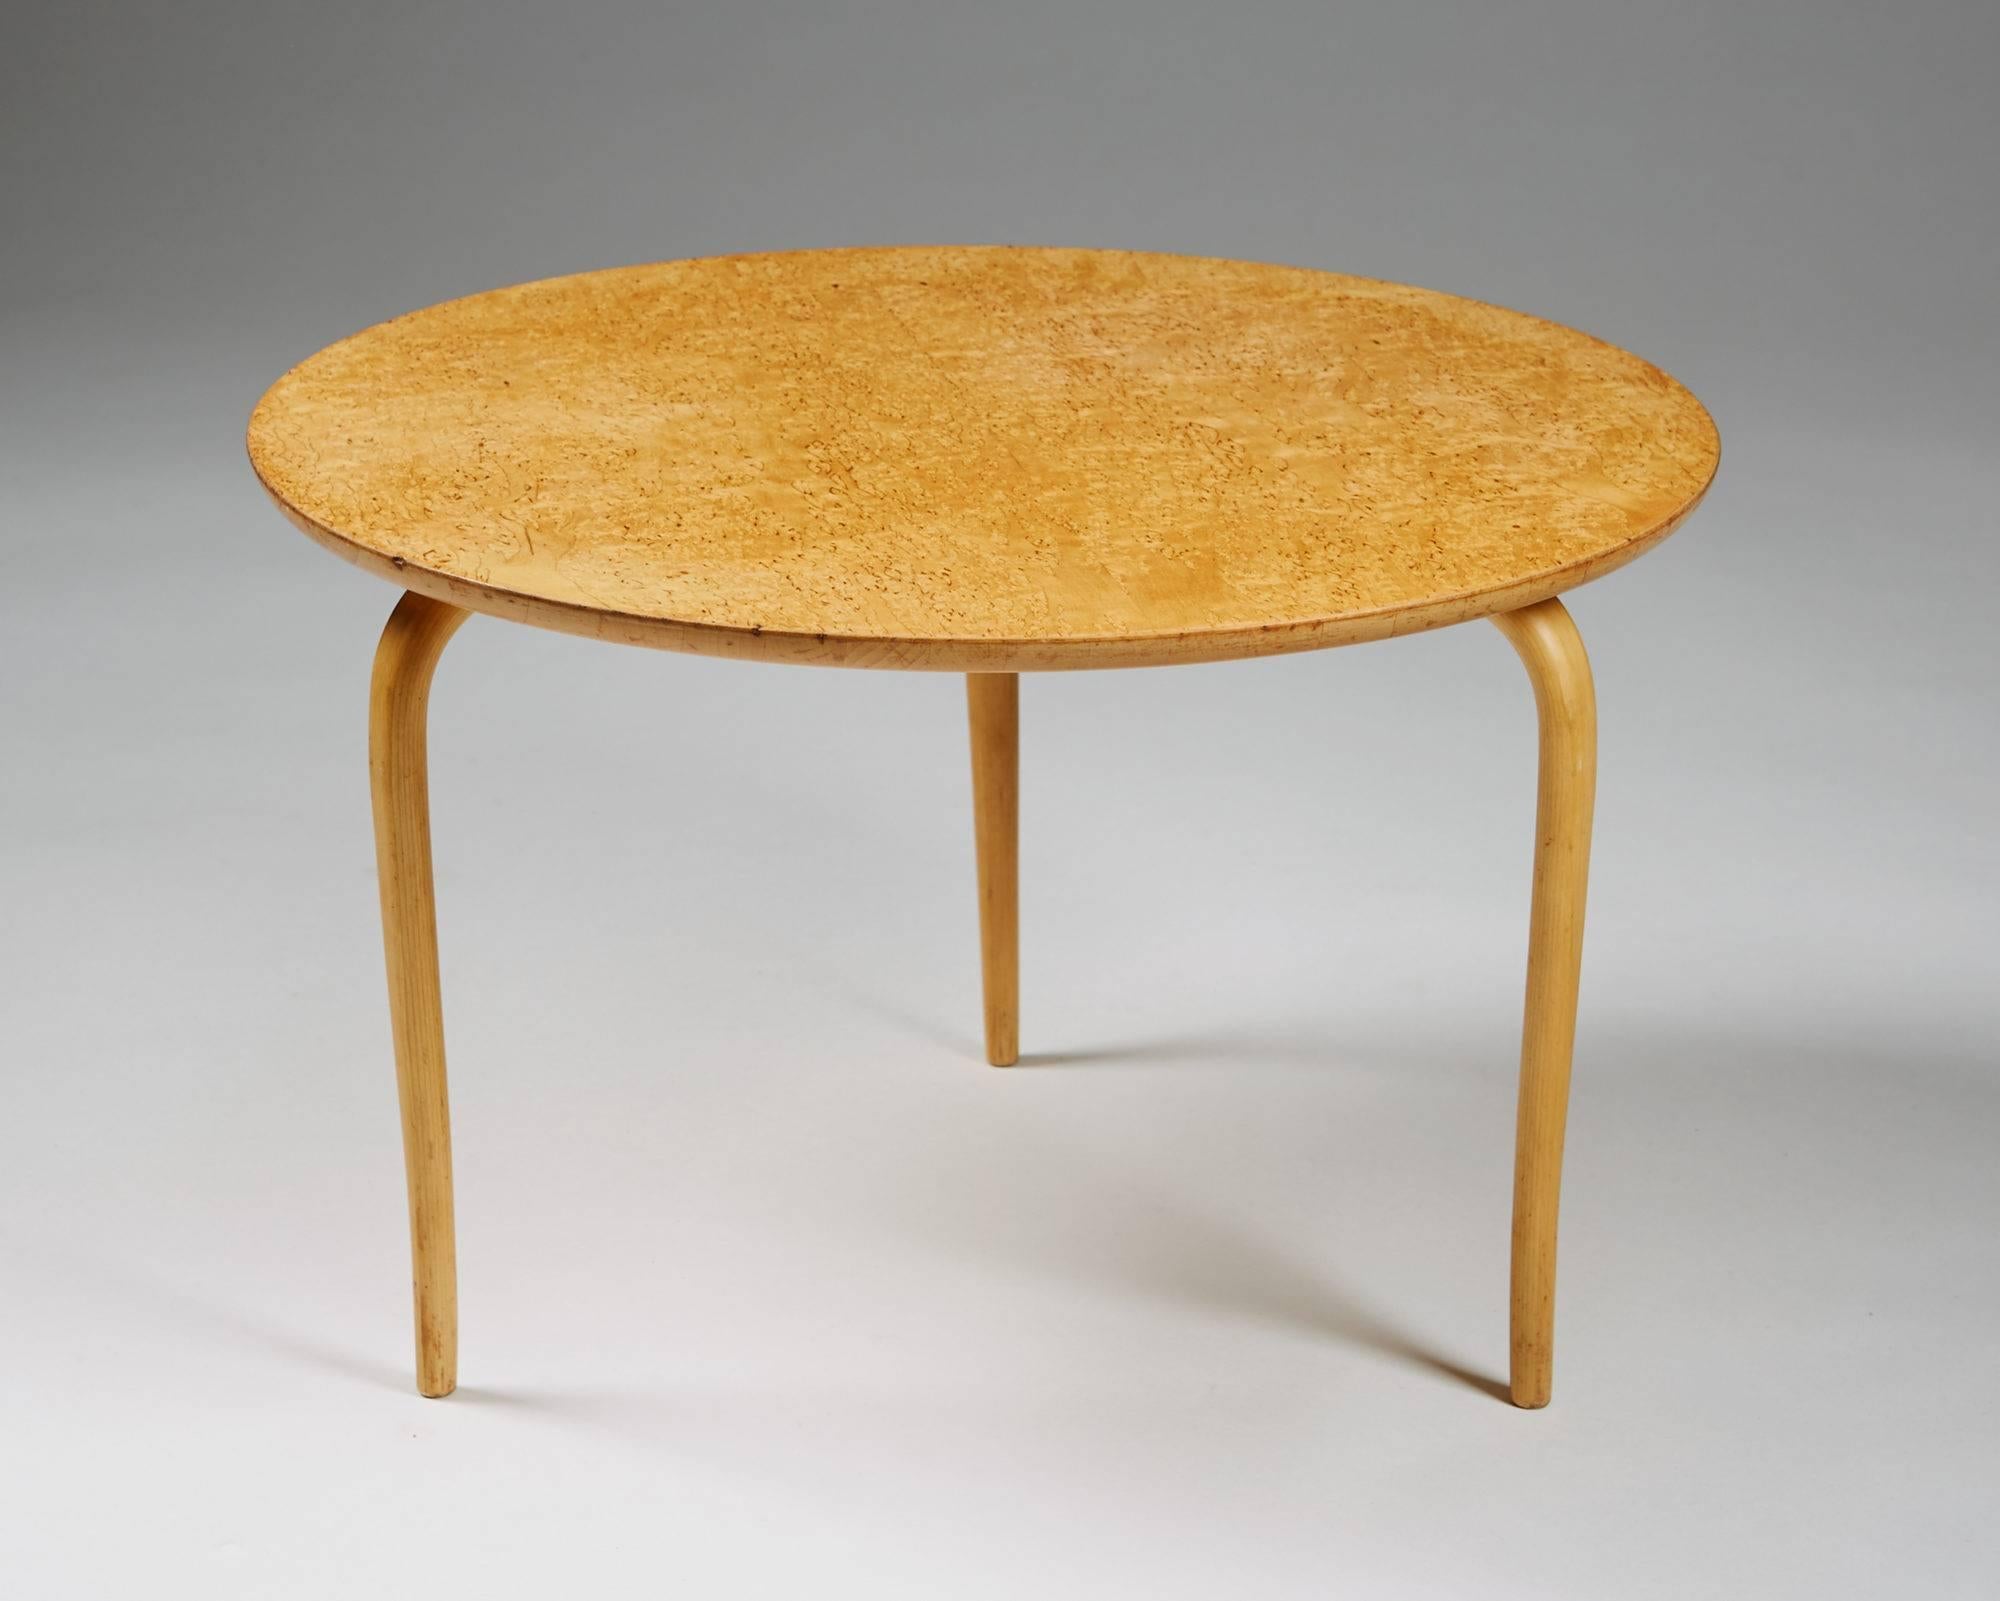 Occasional table designed by Bruno Mathsson for Karl Mathsson,
Sweden, 1950s.
Birch and Karelian birch.

Measures: H 35 cm/ 13 3/4